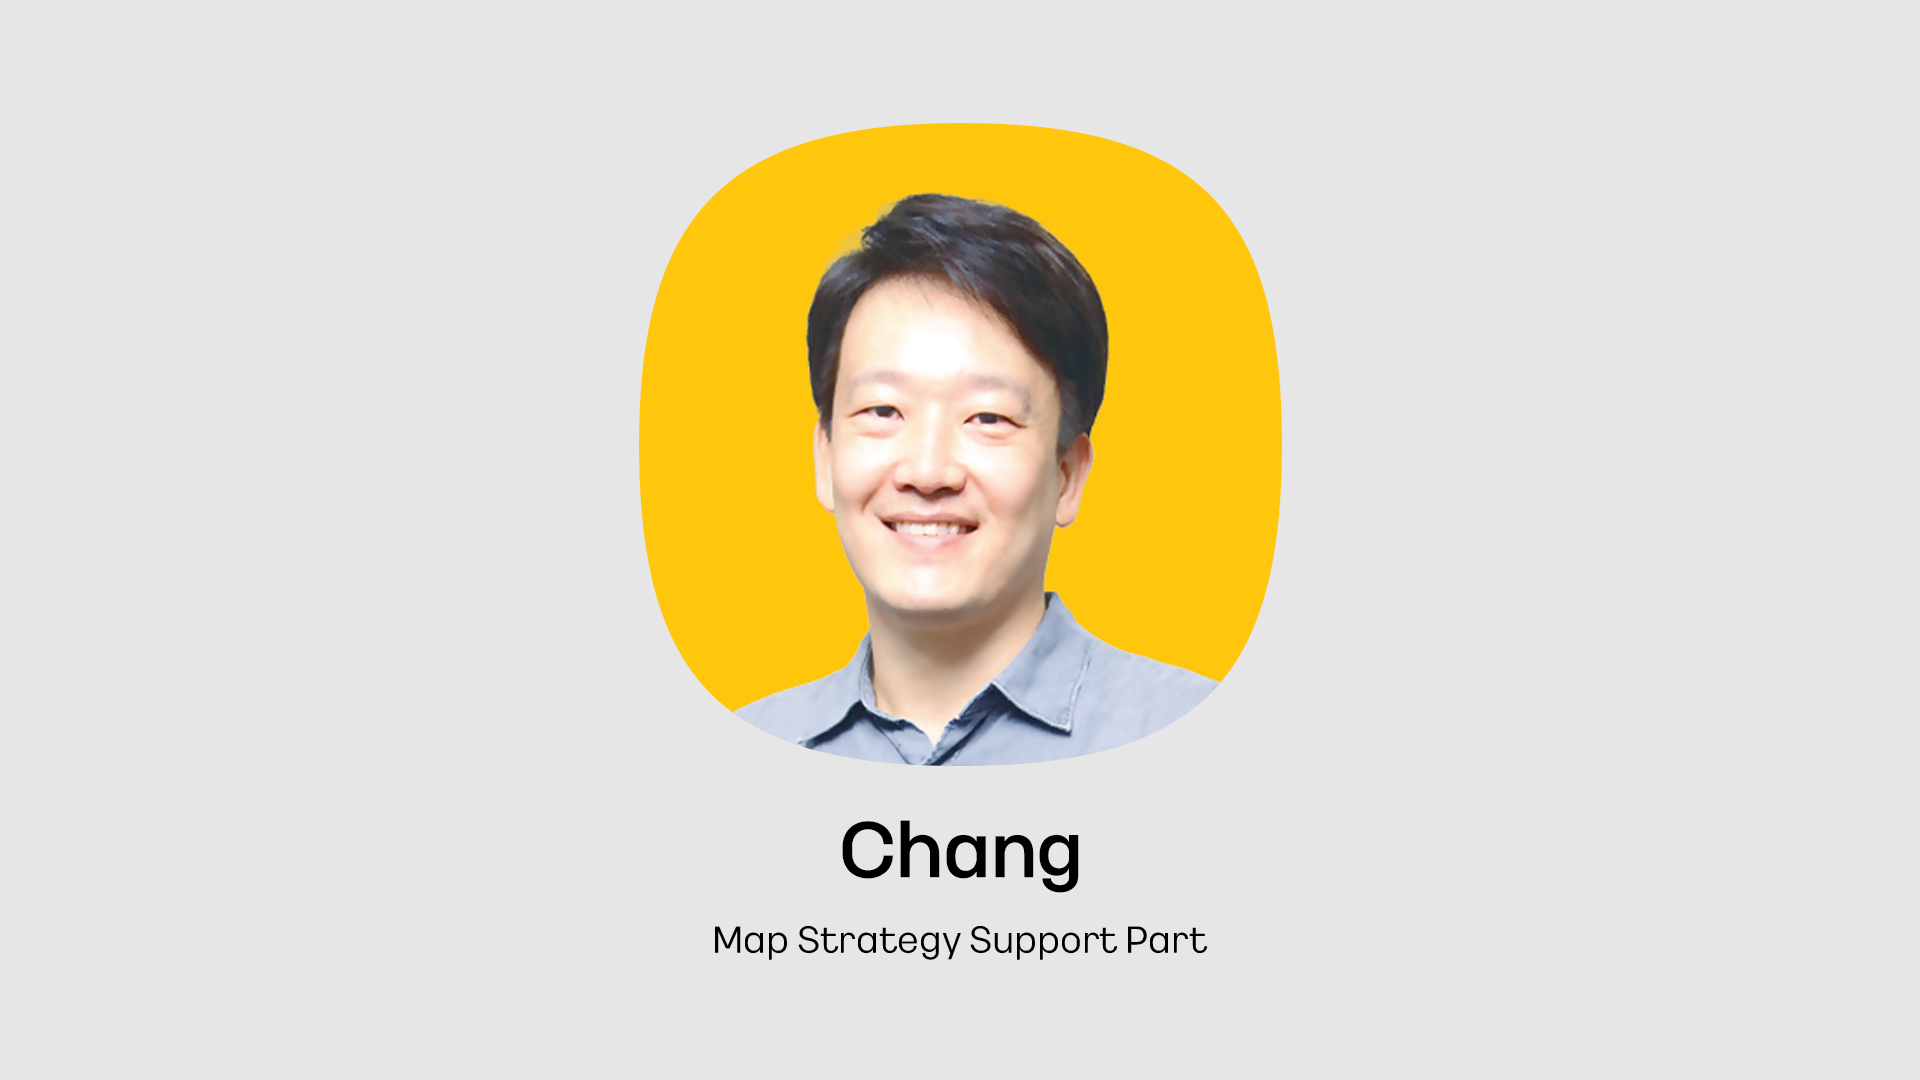 KakaoMap Strategy support part, Chang